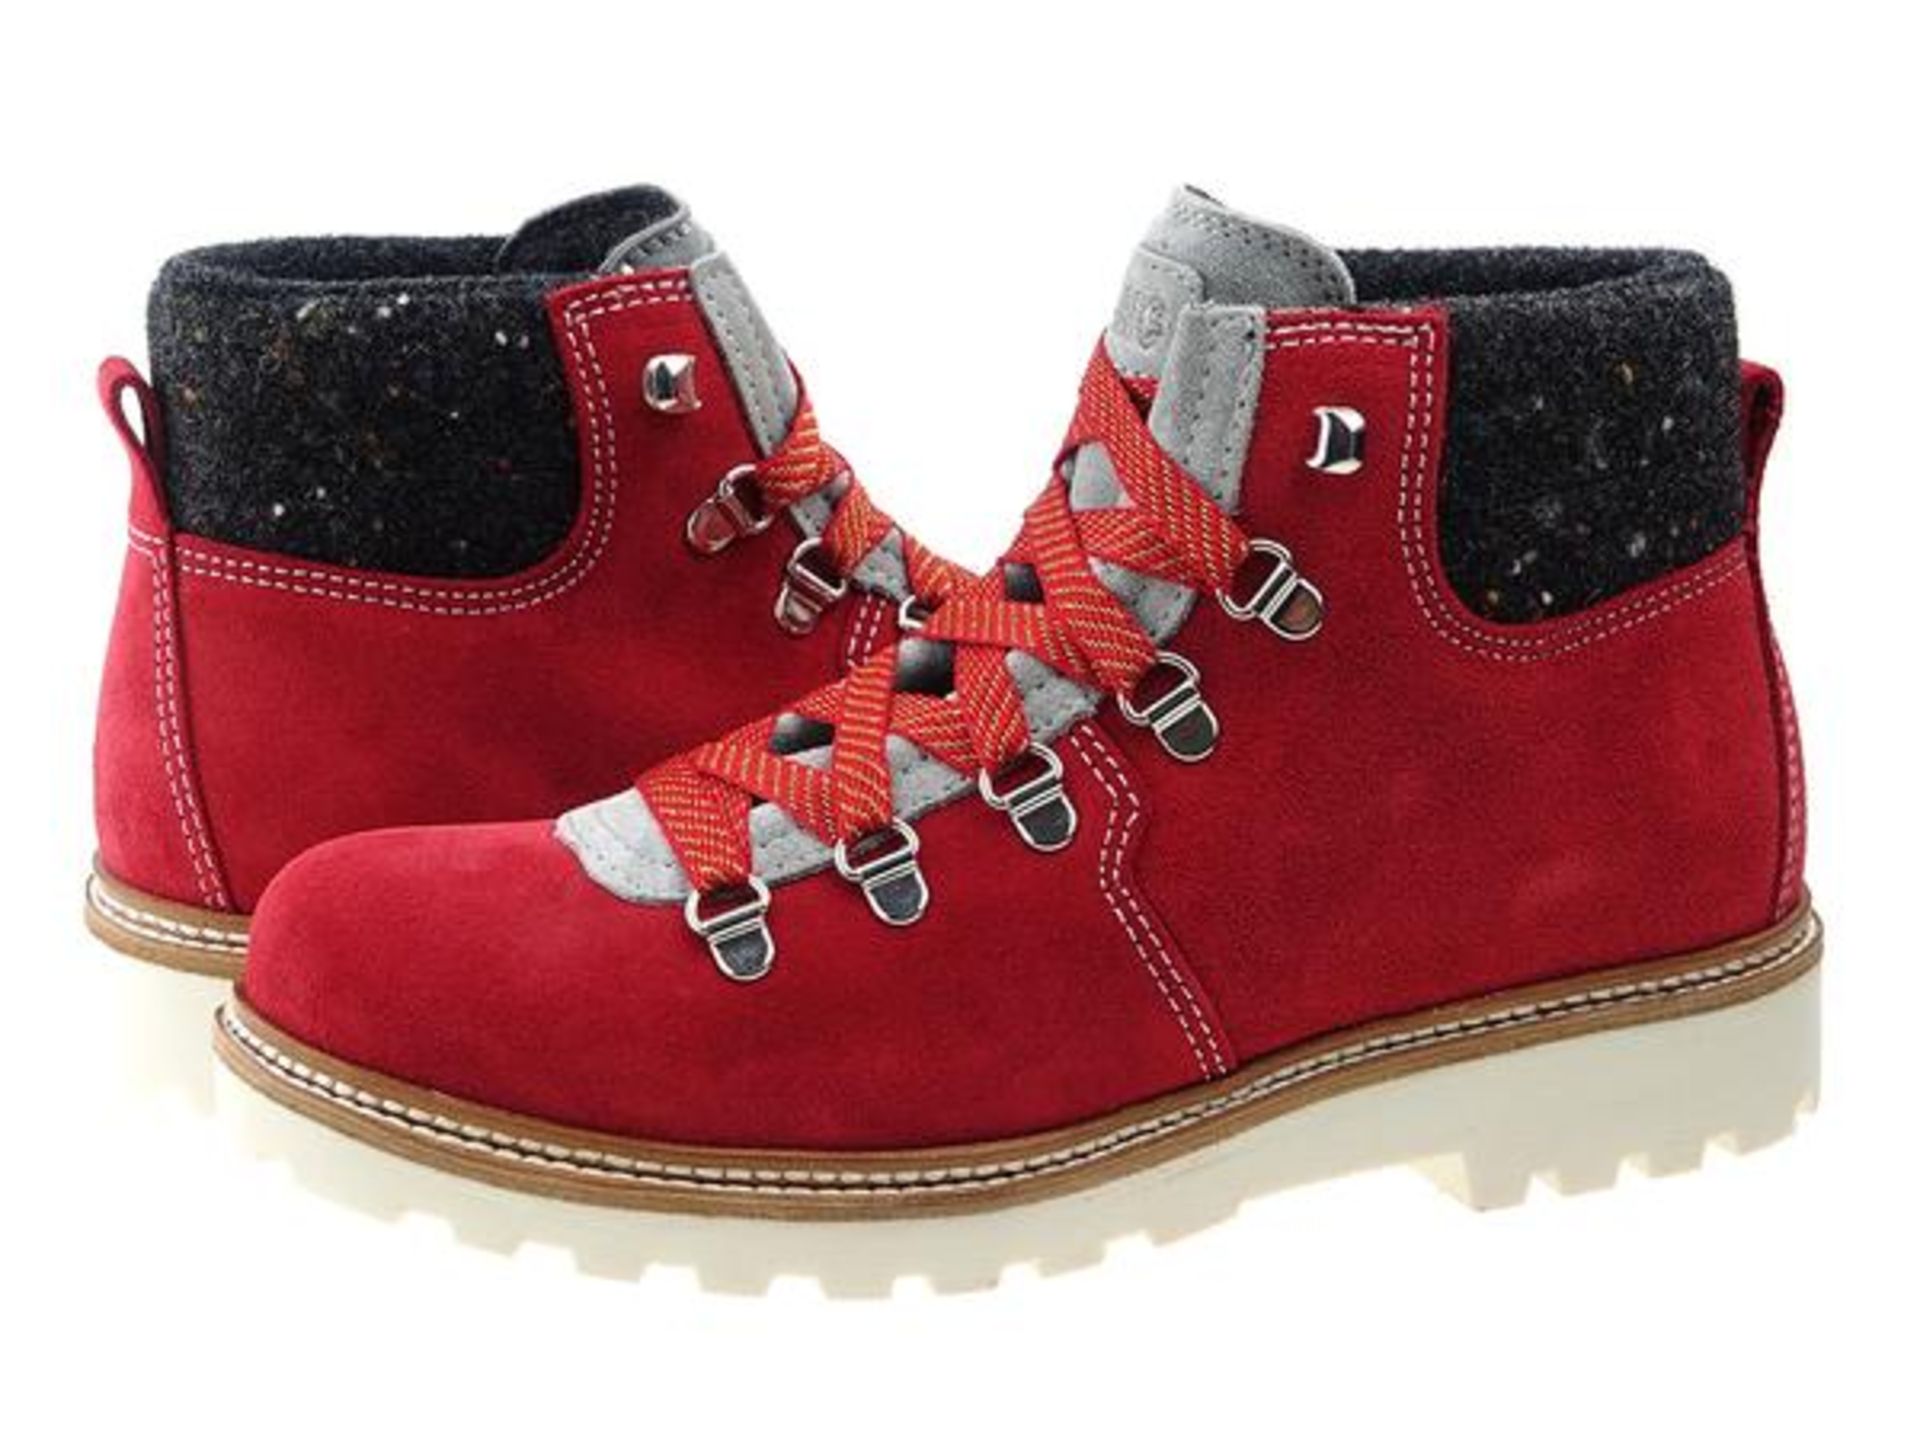 1 x Pair of Designer Olang Merano BTX 815 Rosso Women's Winter Boots - Euro Size 39 - Brand New - Image 3 of 4